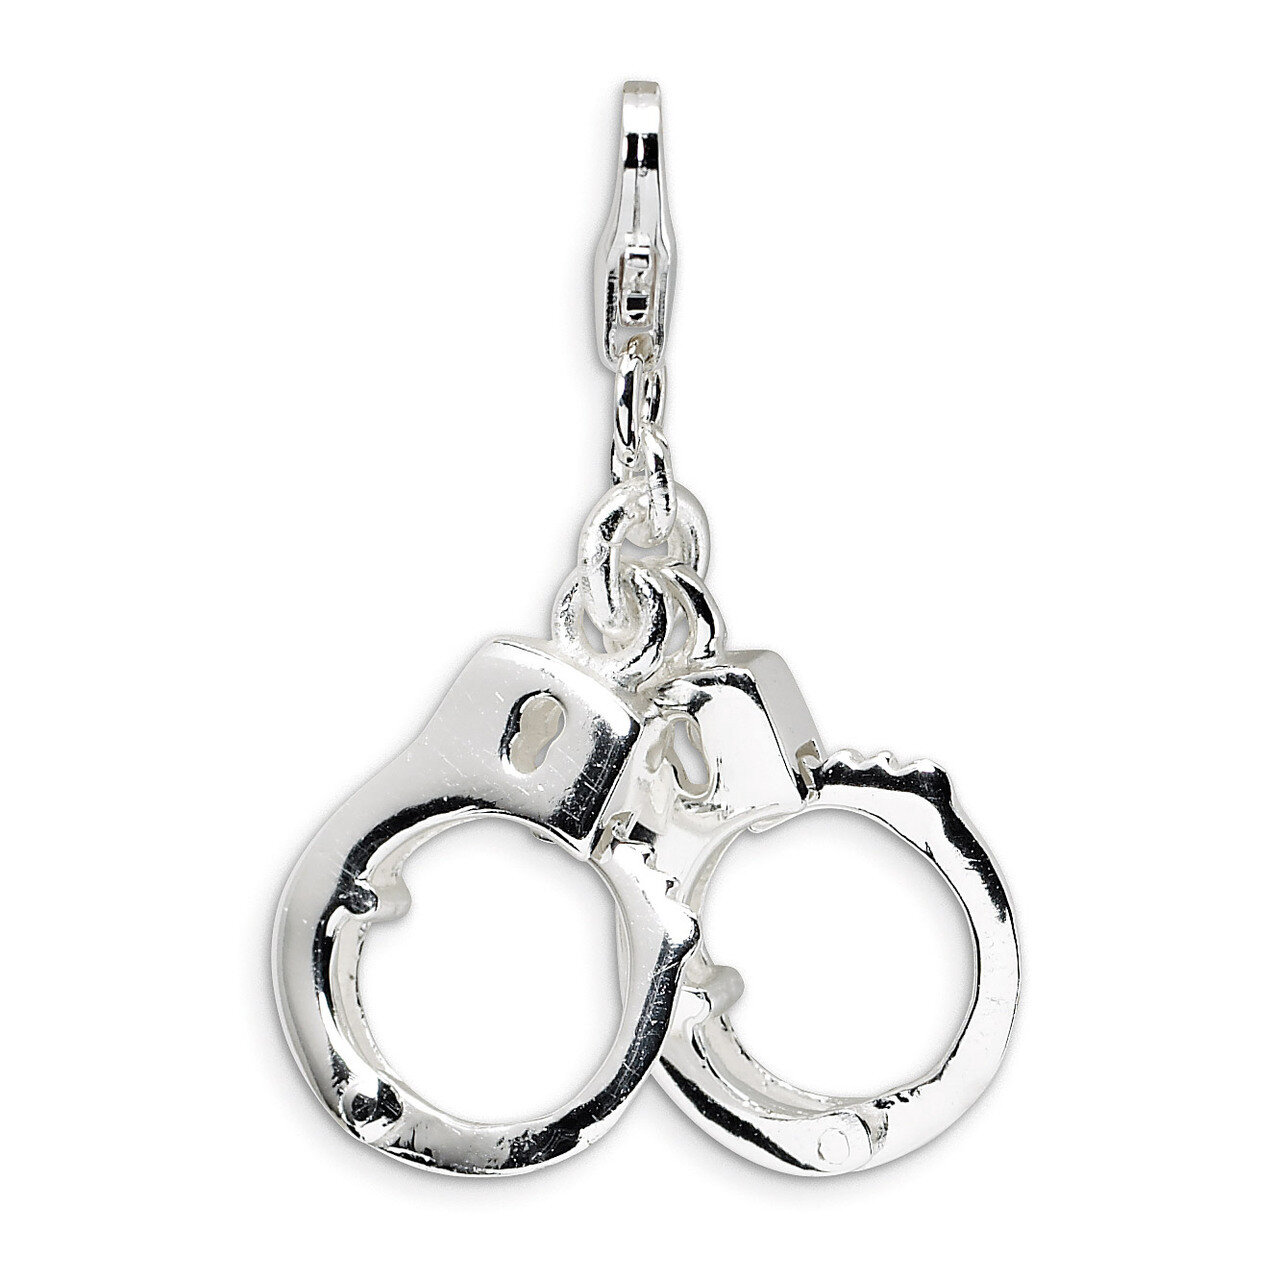 3-D Polished Movable Hand Cuffs Charm Sterling Silver QCC473